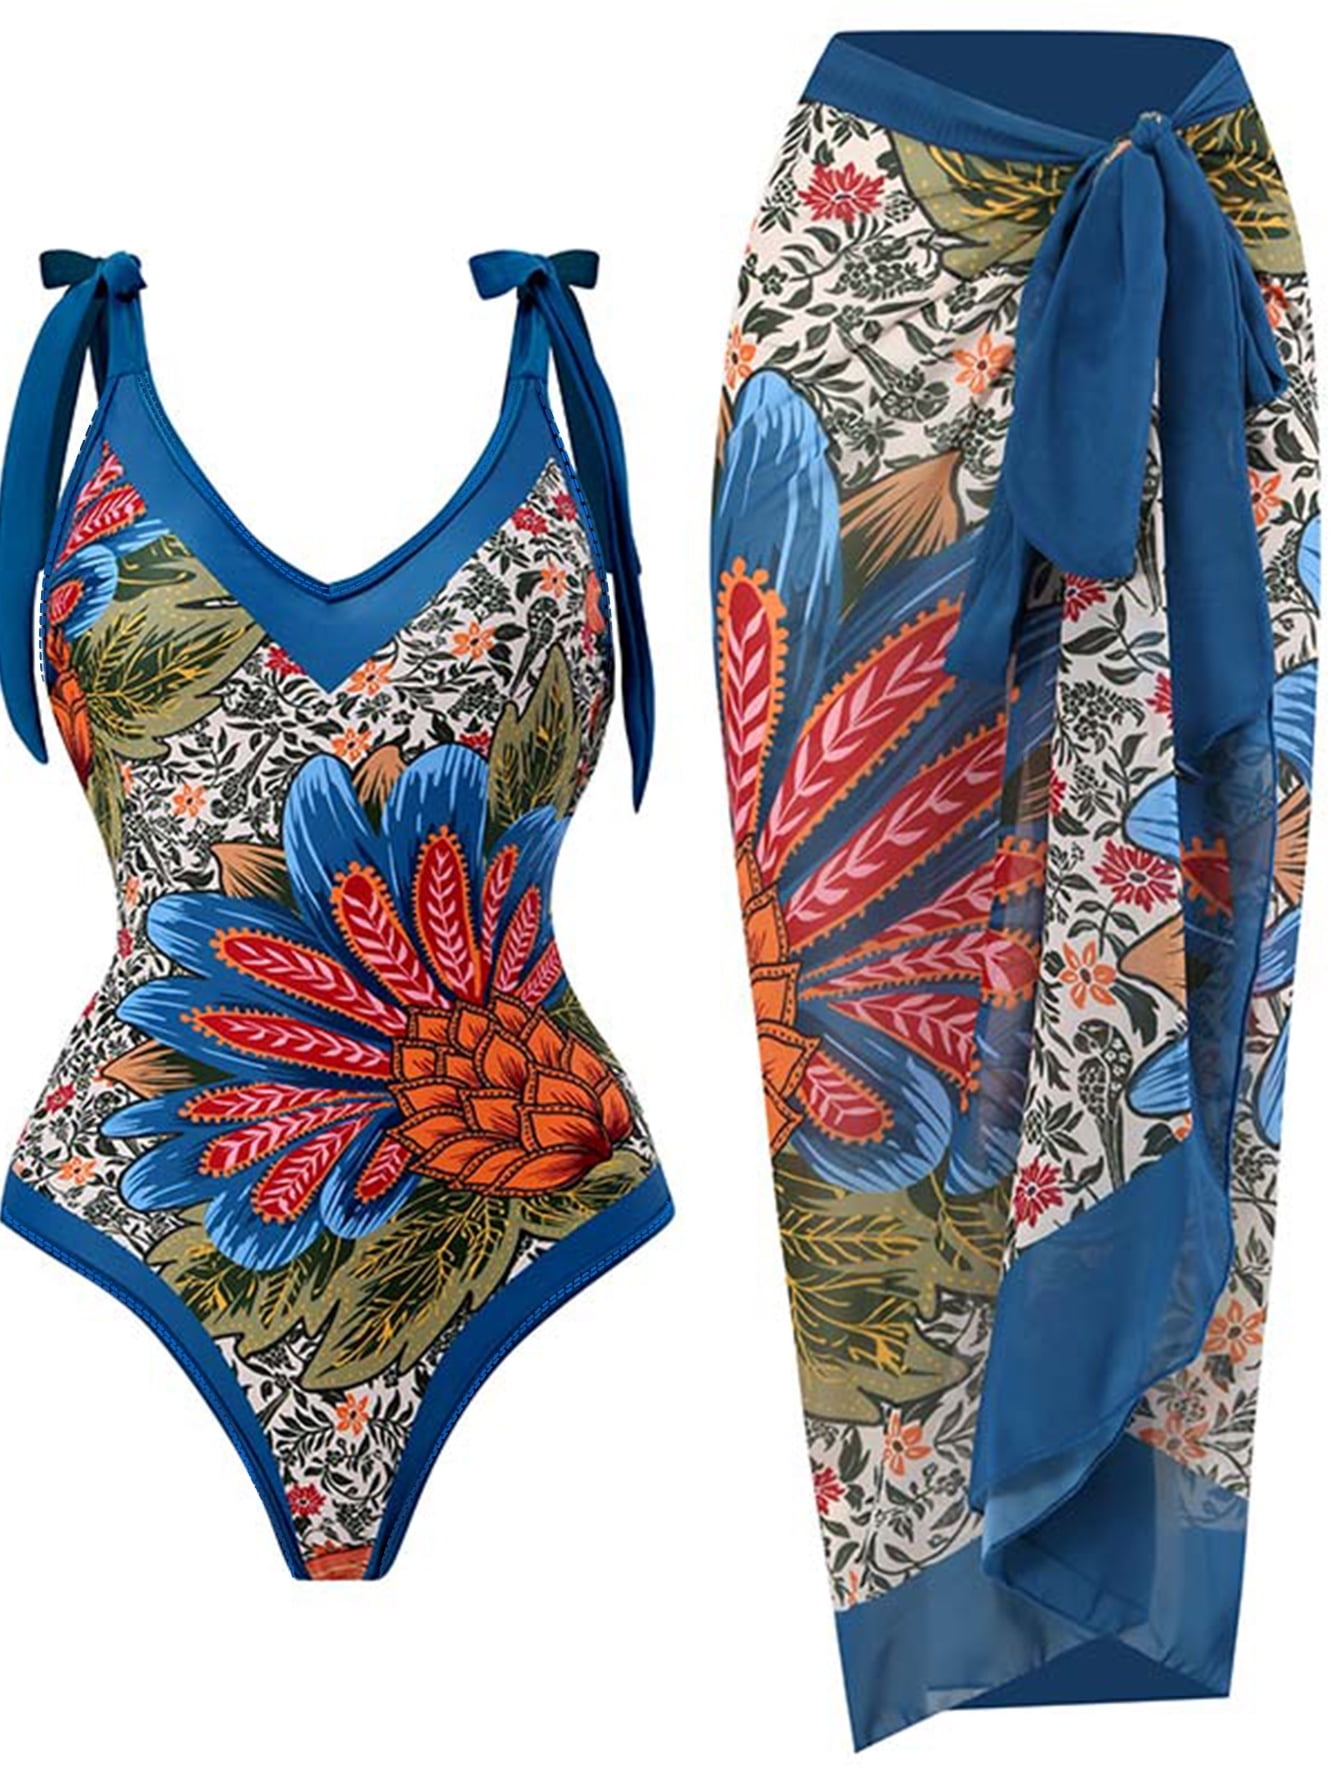 BERANMEY Women's Tropical Print One Piece Swimsuit with Cover up Beach ...